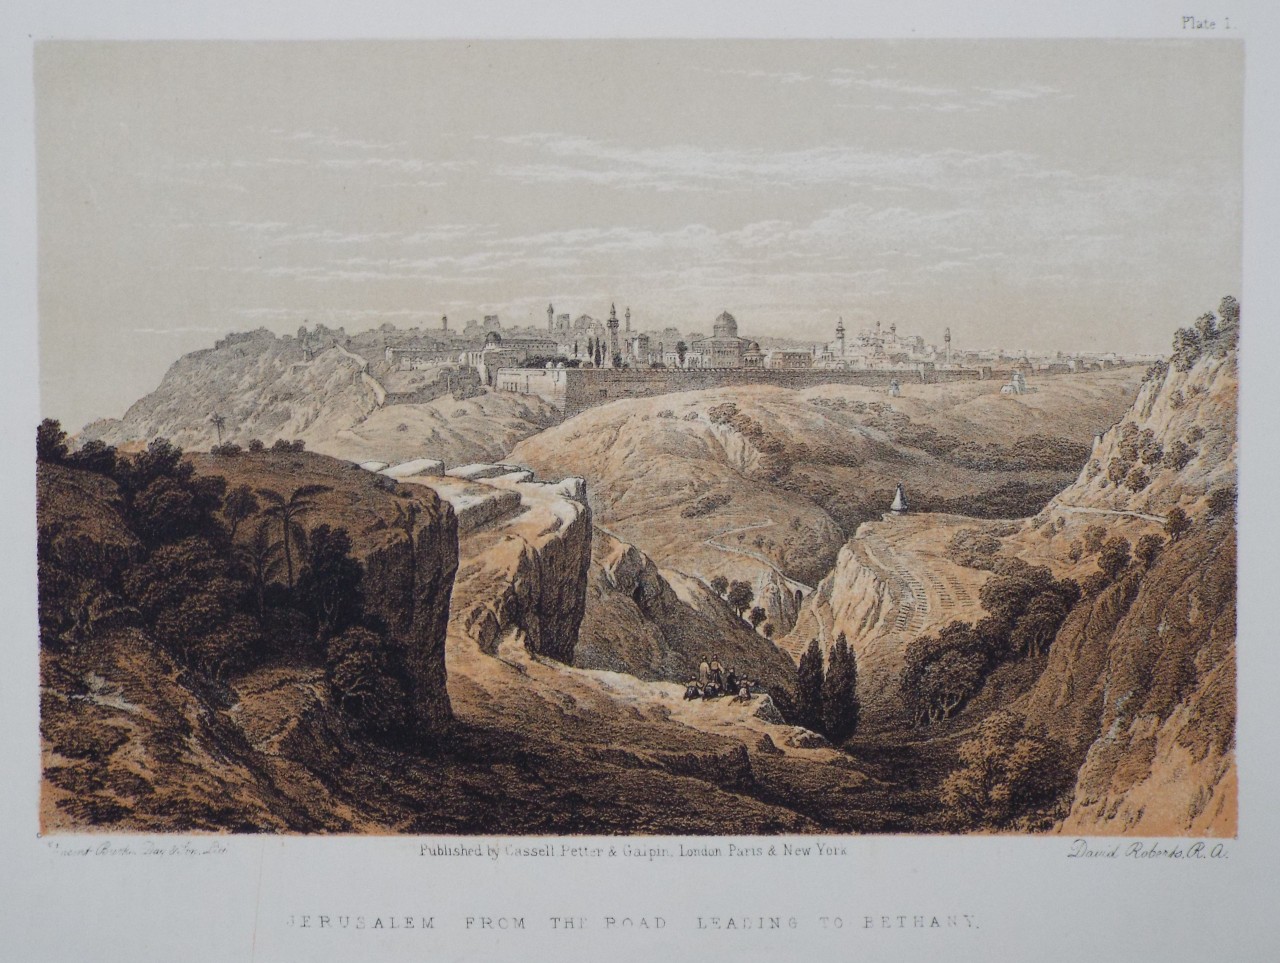 Lithograph - Jerusalem from the road leading to Bethany.